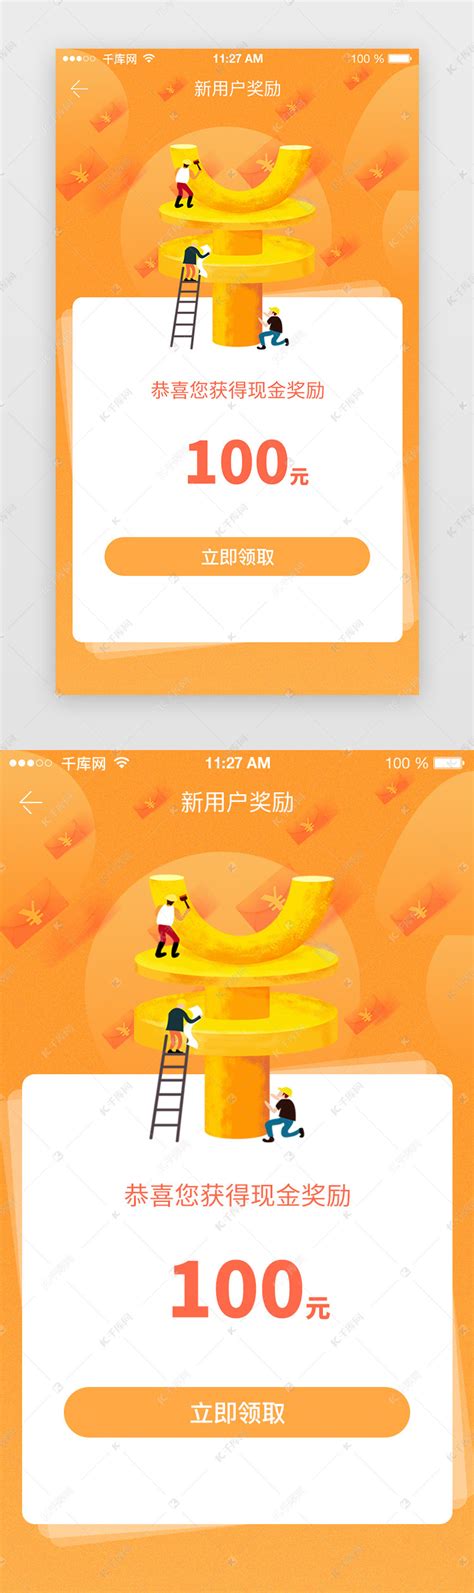 eBay deals and events 奖励领取方式